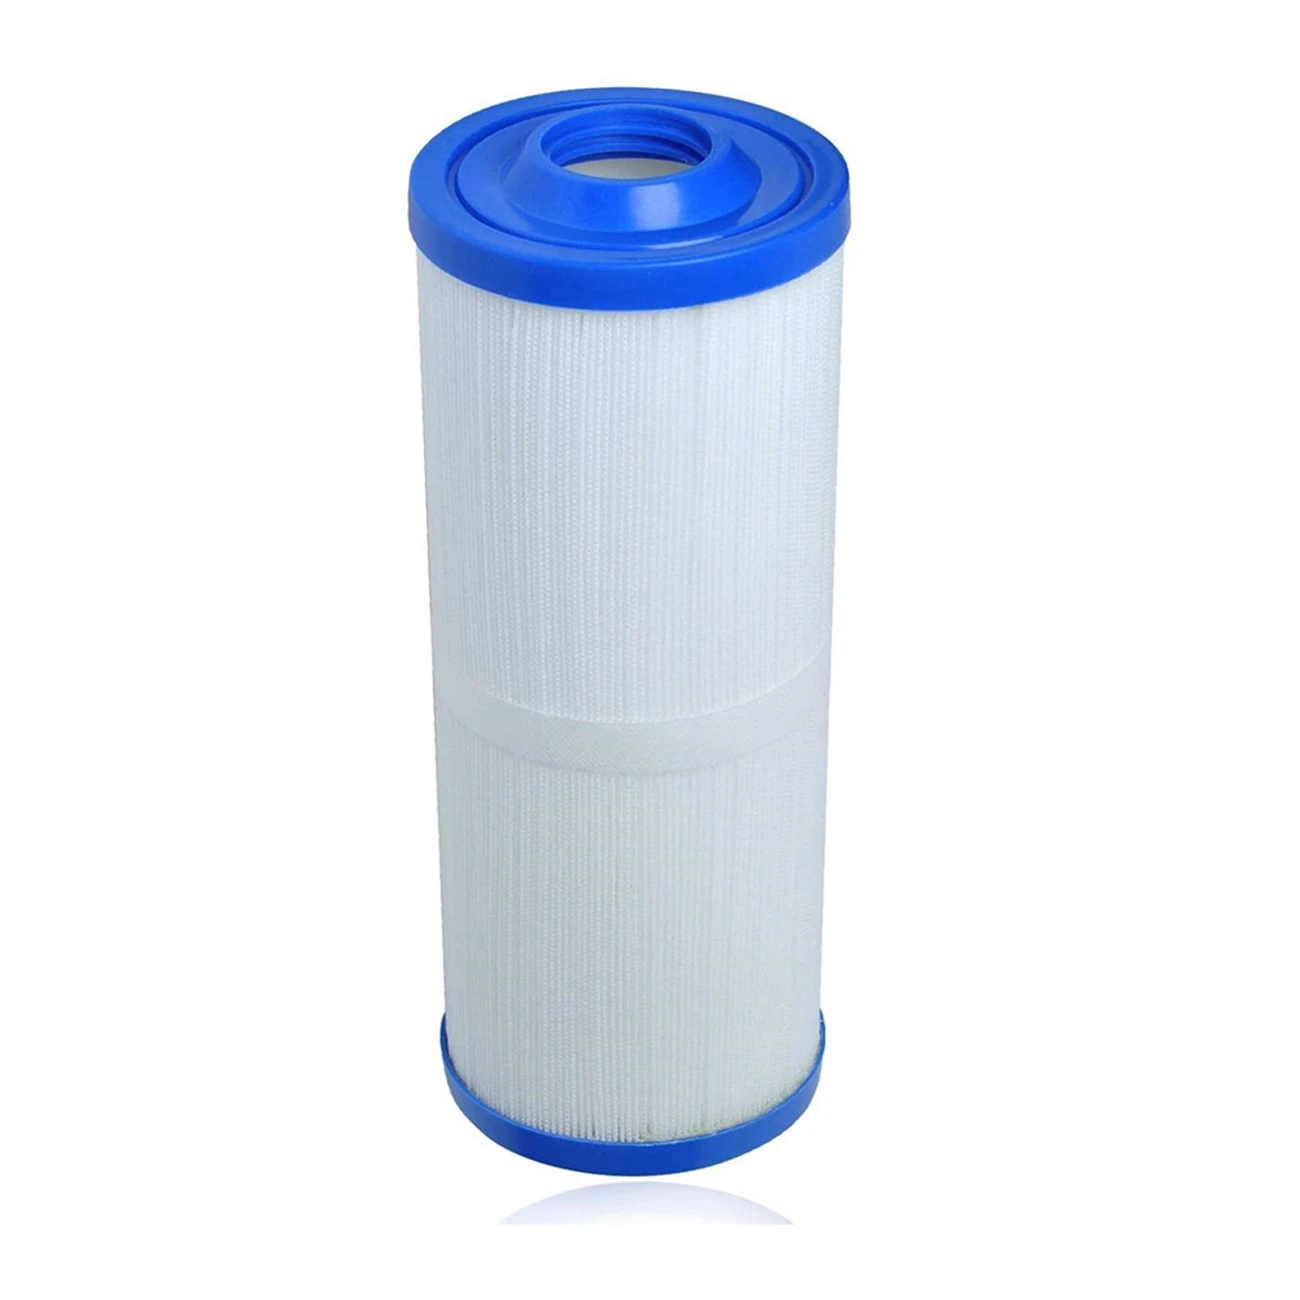 

Spa Filter 2 Inch Female SAE Threaded for PWW50L Filbur FC-0172 SD-01143 Unicel 4CH-949 for Hot Tub Filter 817-4050